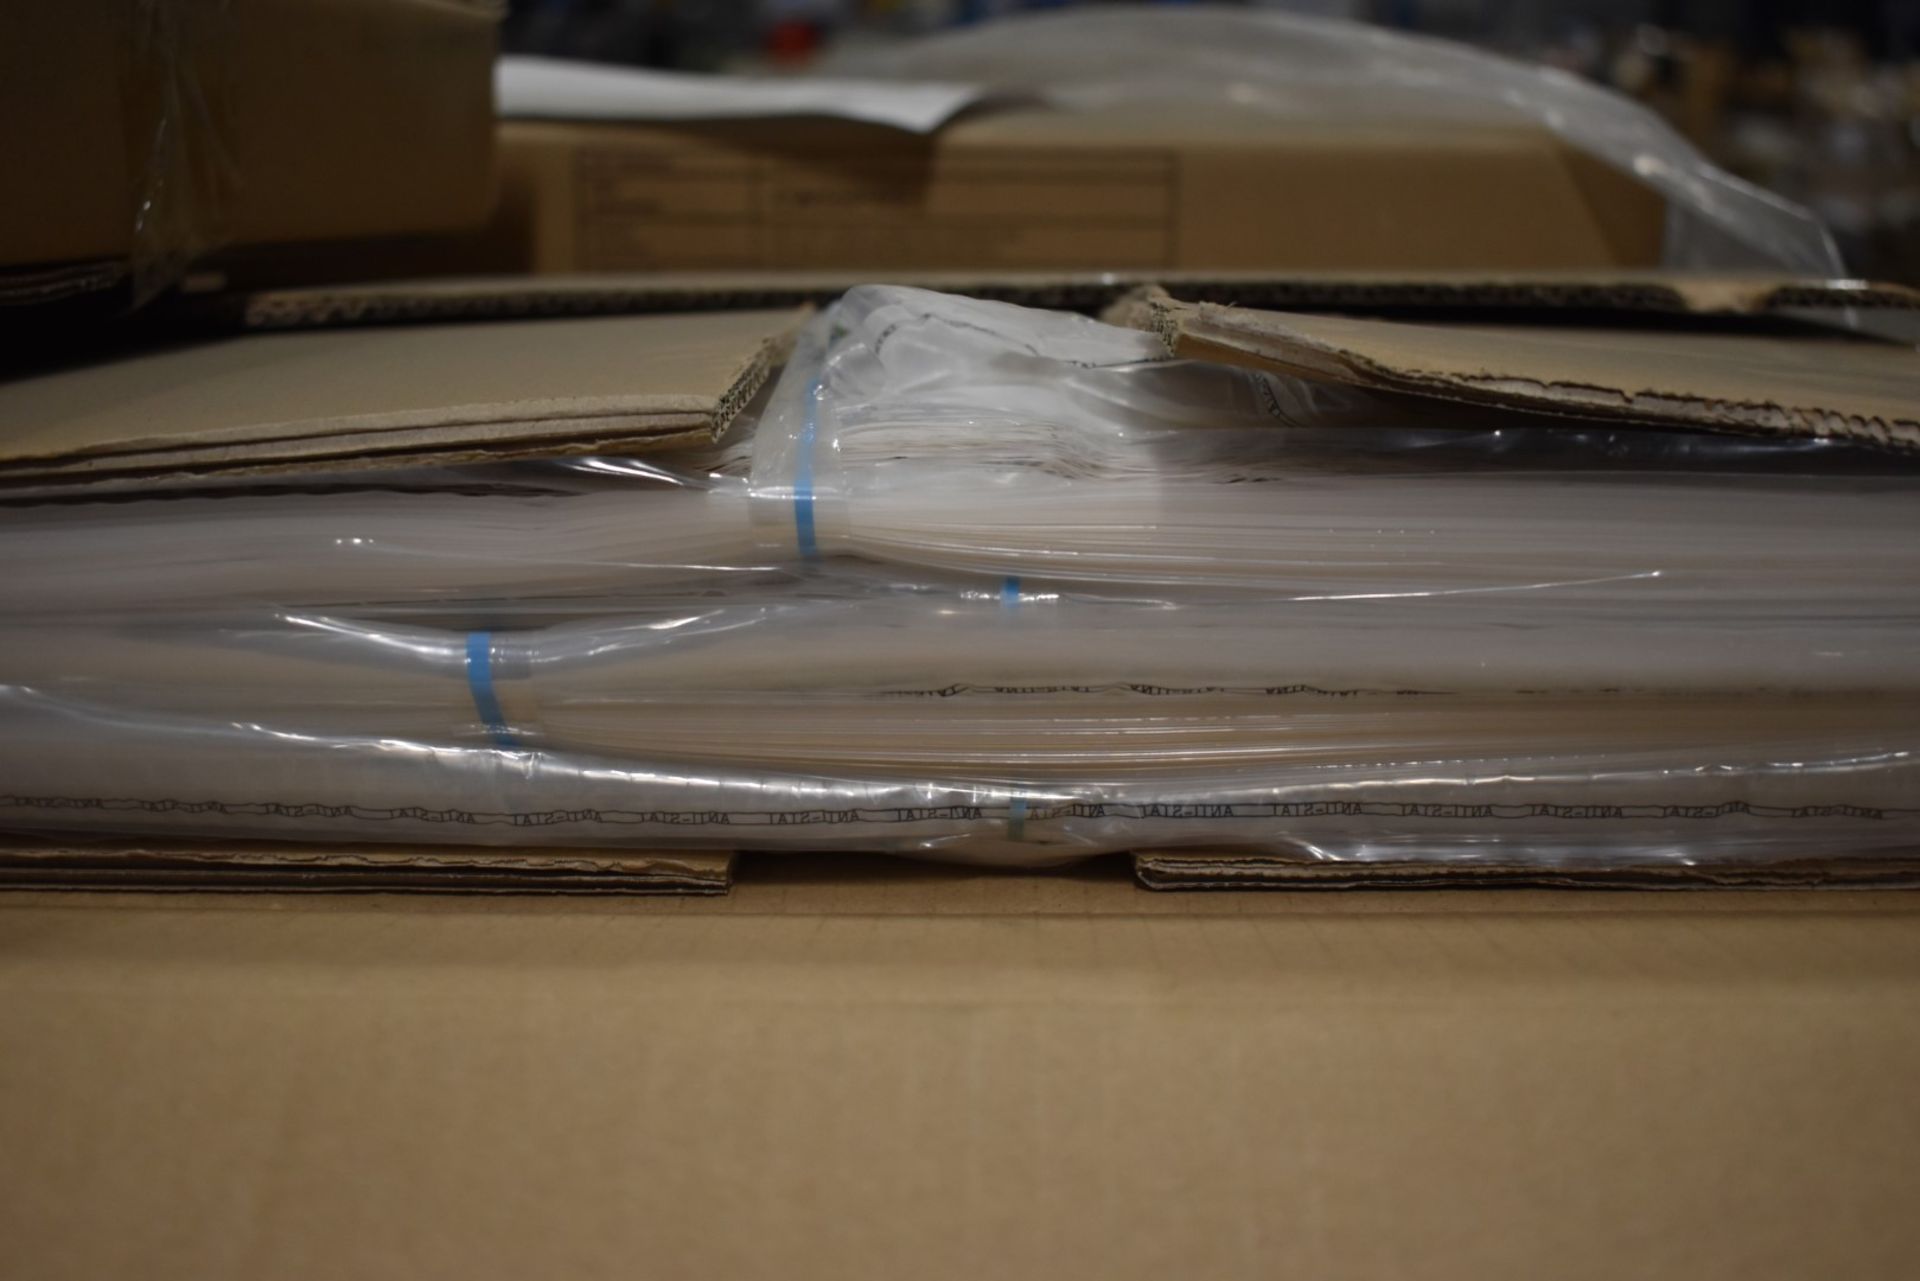 35 x Boxes of Clear Polythene Self Seal Bags - Bag Size 450x700mm - Ref LD273 - CL480 - Location: - Image 3 of 3